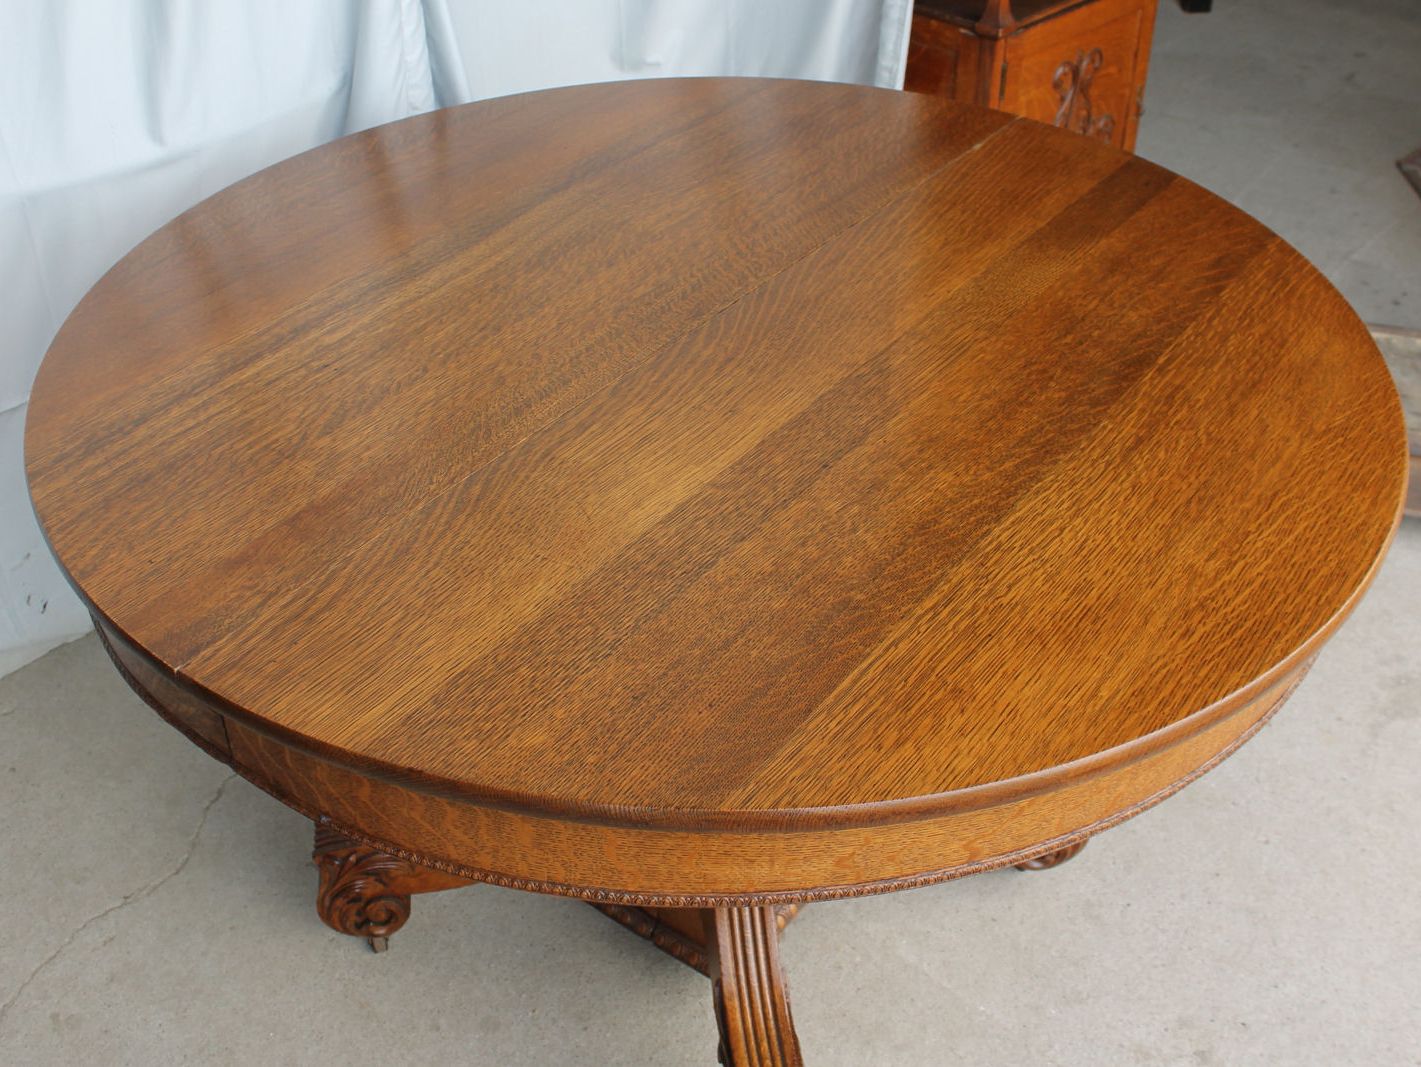 Best And Newest Bargain John's Antiques » Blog Archive Antique Round Oak For Antique Oak Dining Tables (View 3 of 20)